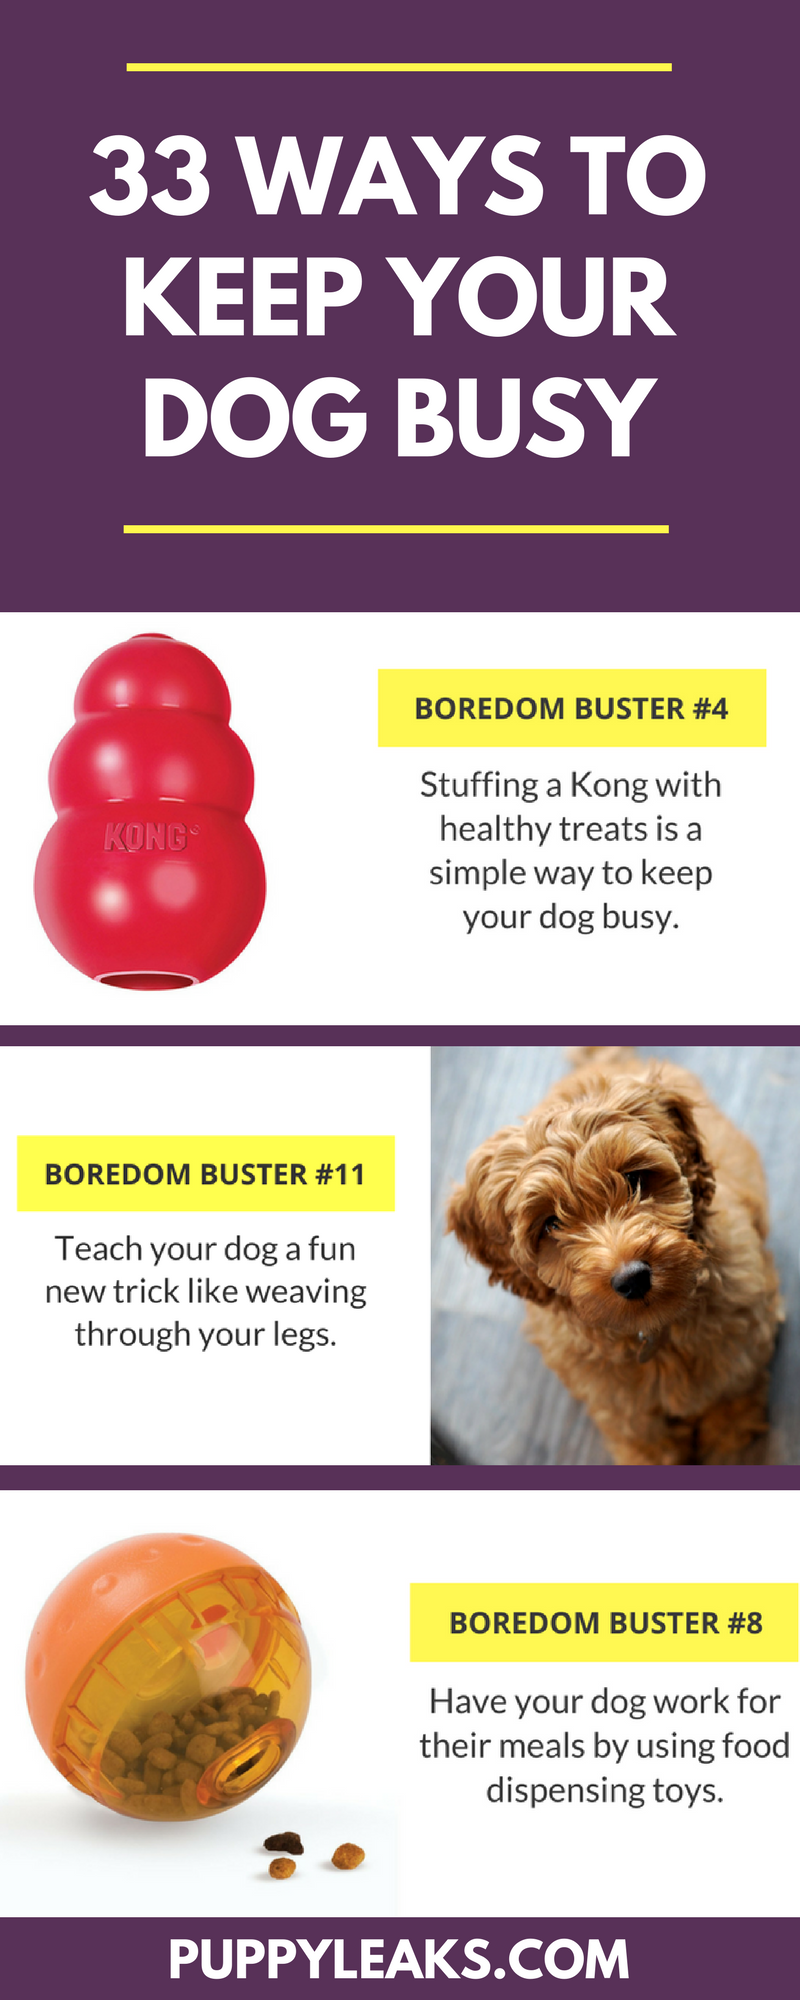 Is Your Dog Bored? 33 Simple Ways to Keep Your Dog Busy